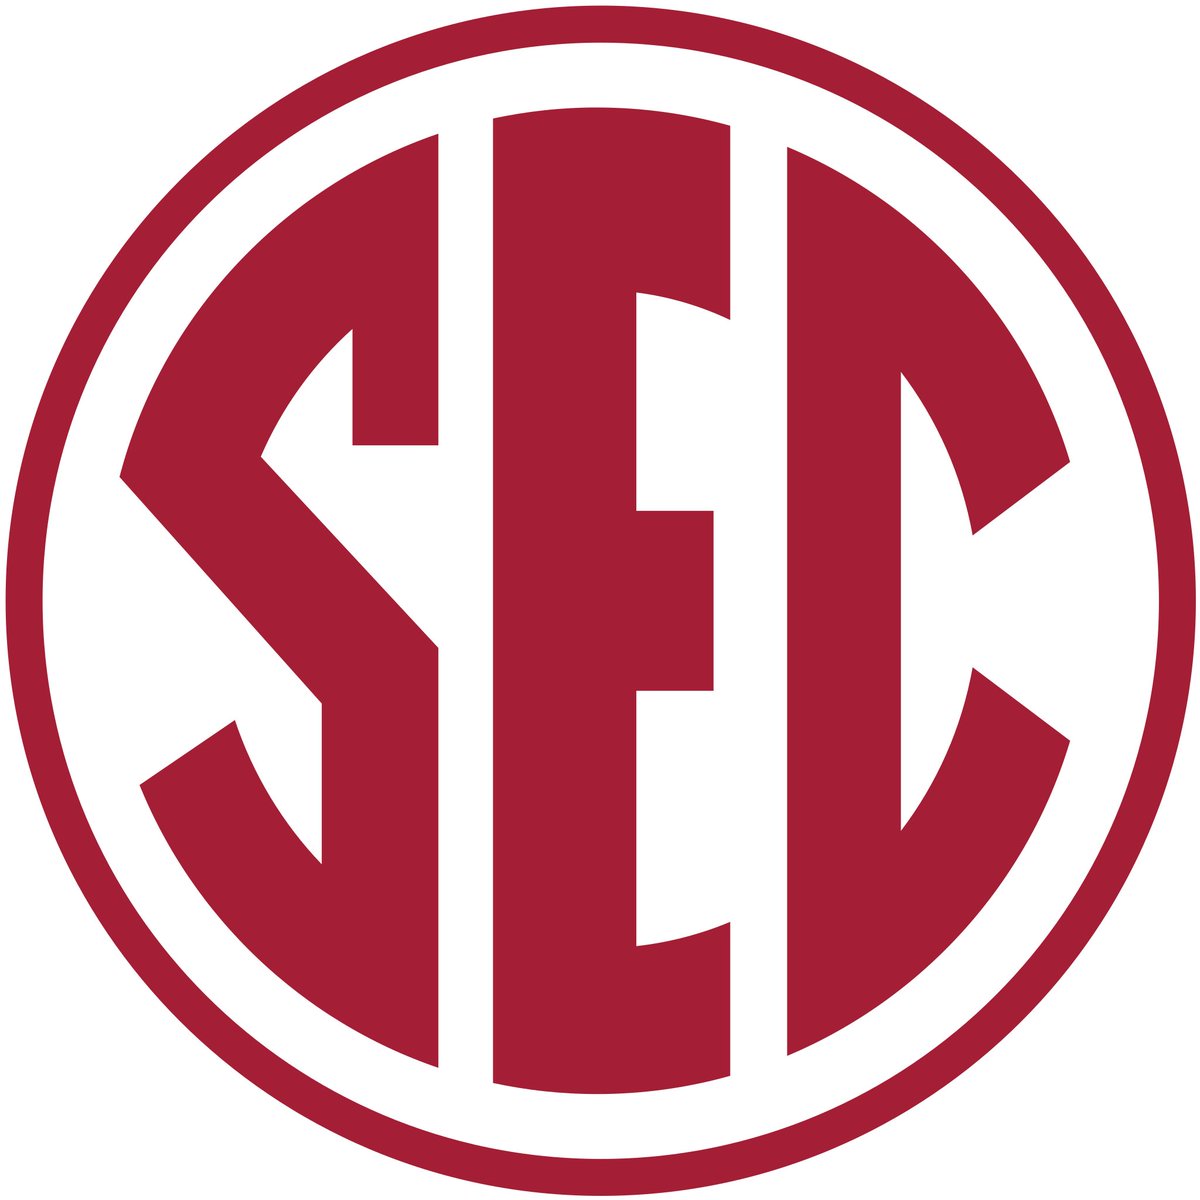 Starting in 2024, the SEC will be without divisions, per @Brett_McMurphy.

The schedules will be made based off fairness, and will honor traditional rivalries. Conference schedule to remain at 8 games.